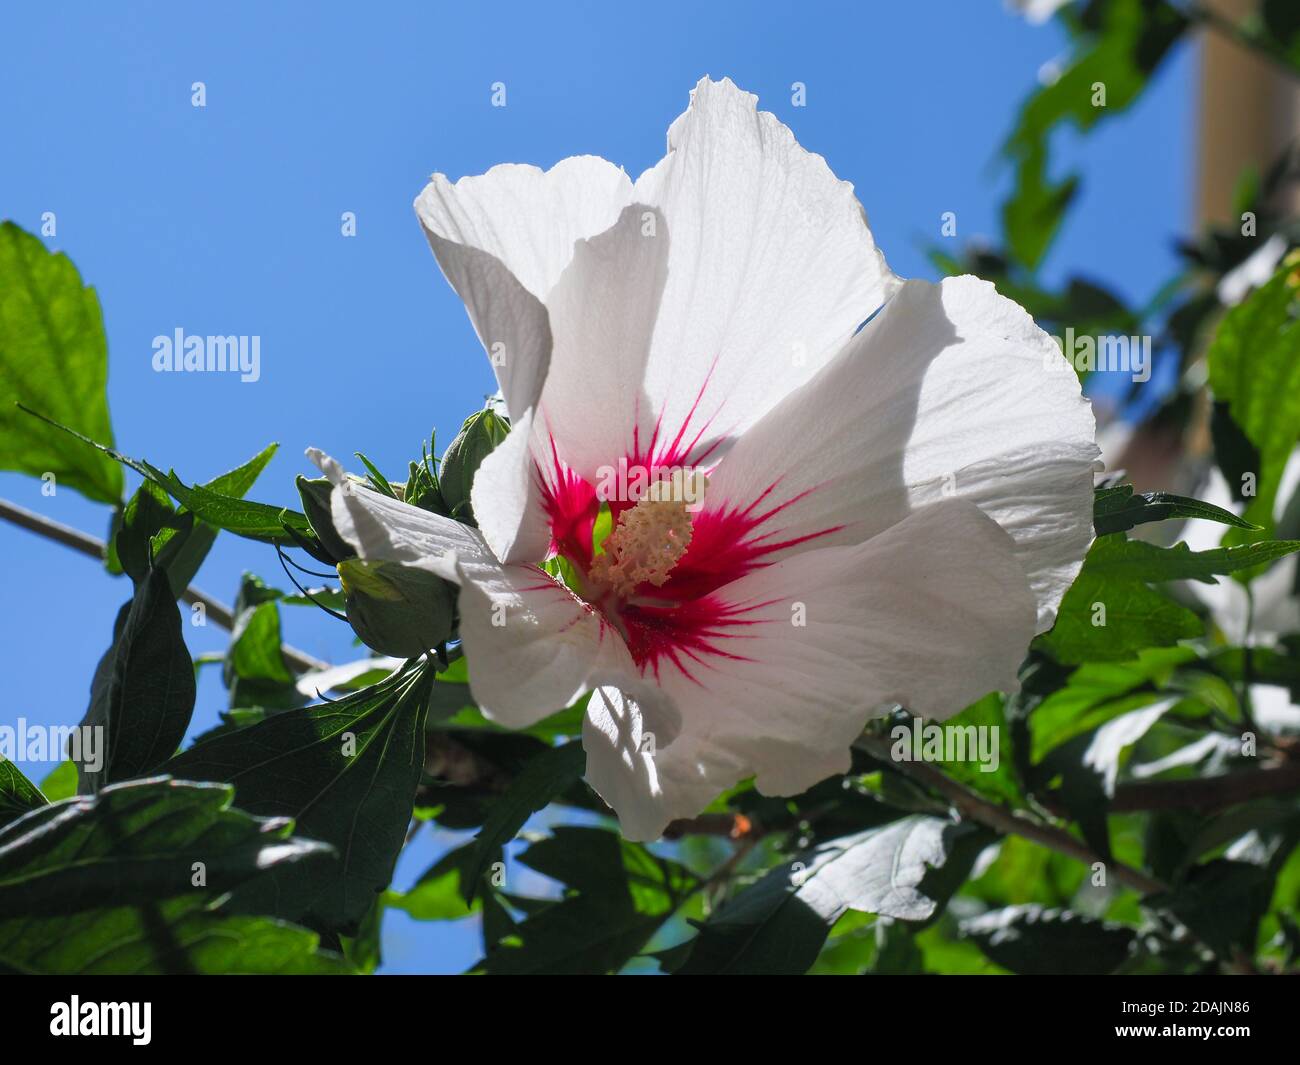 Chinese hibiscus or rose mallow flower. Hibiscus Rosa Sinensis blossom with creamy white petals and burgundy center. Hawaiian or Chinese rose bloom. Stock Photo